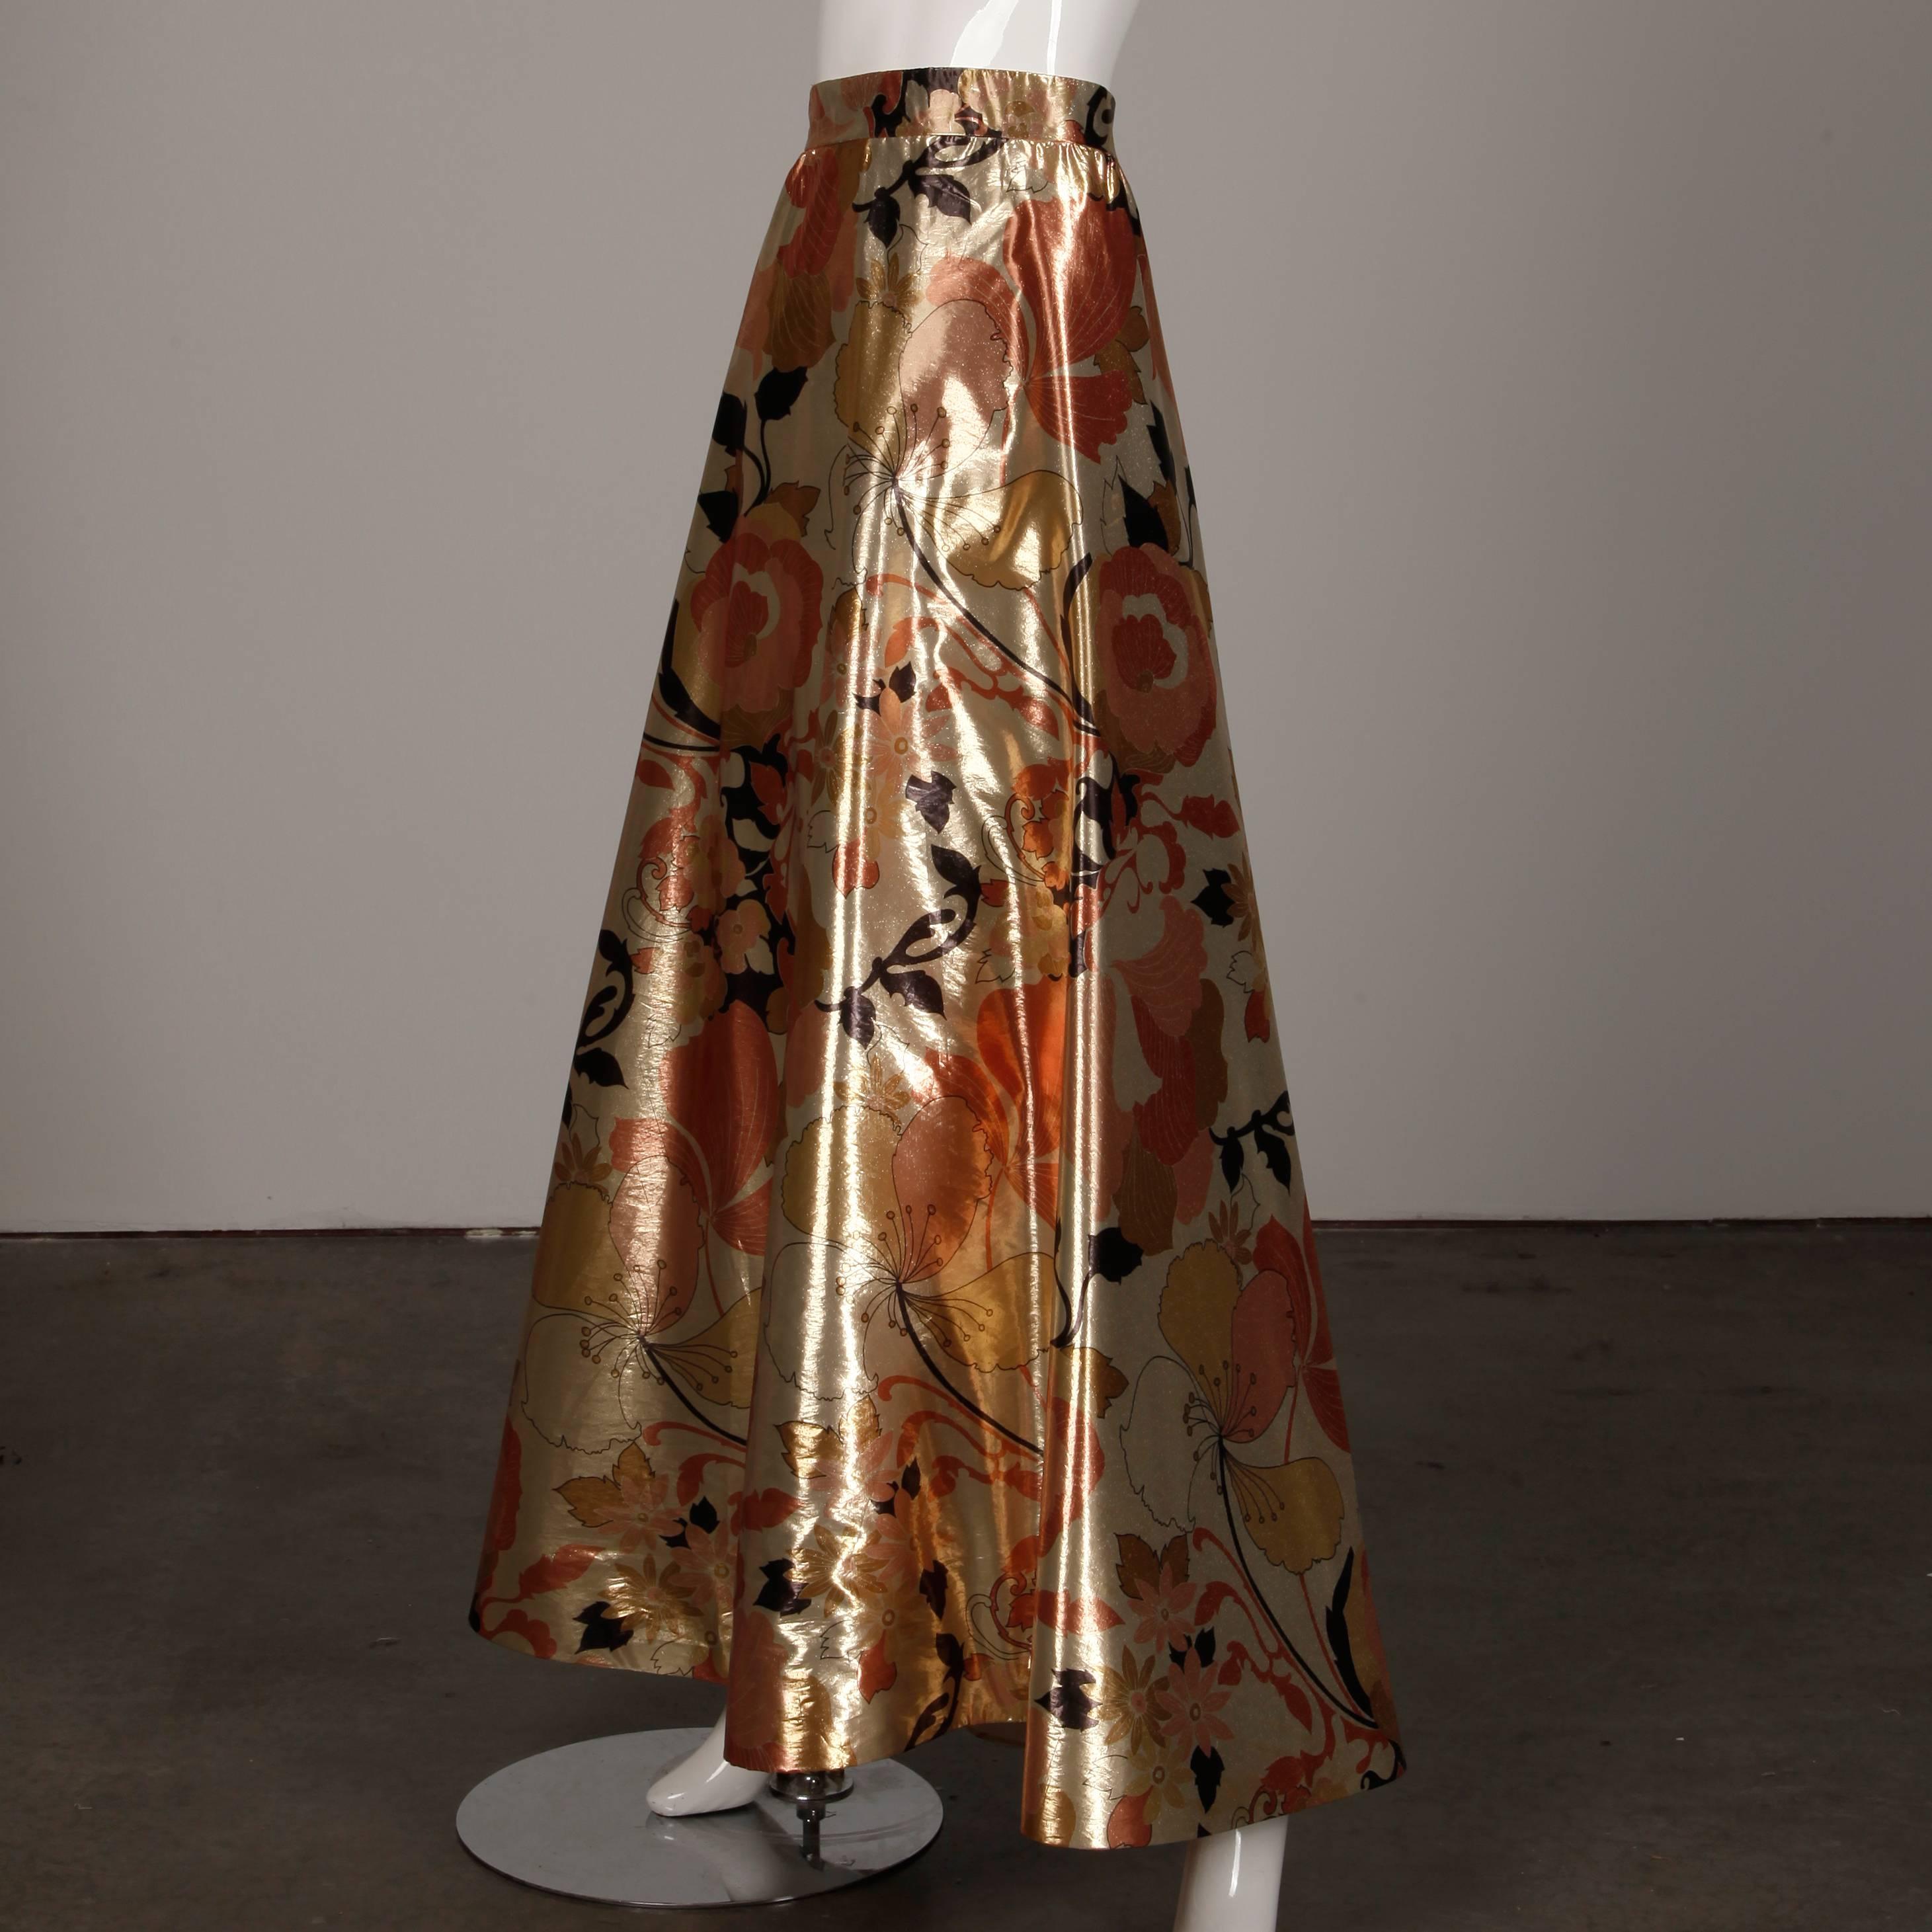 1970s Arnold Scaasi Vintage Metallic Gold Lamé Silk Dress/ Gown (Skirt + Top) For Sale 2